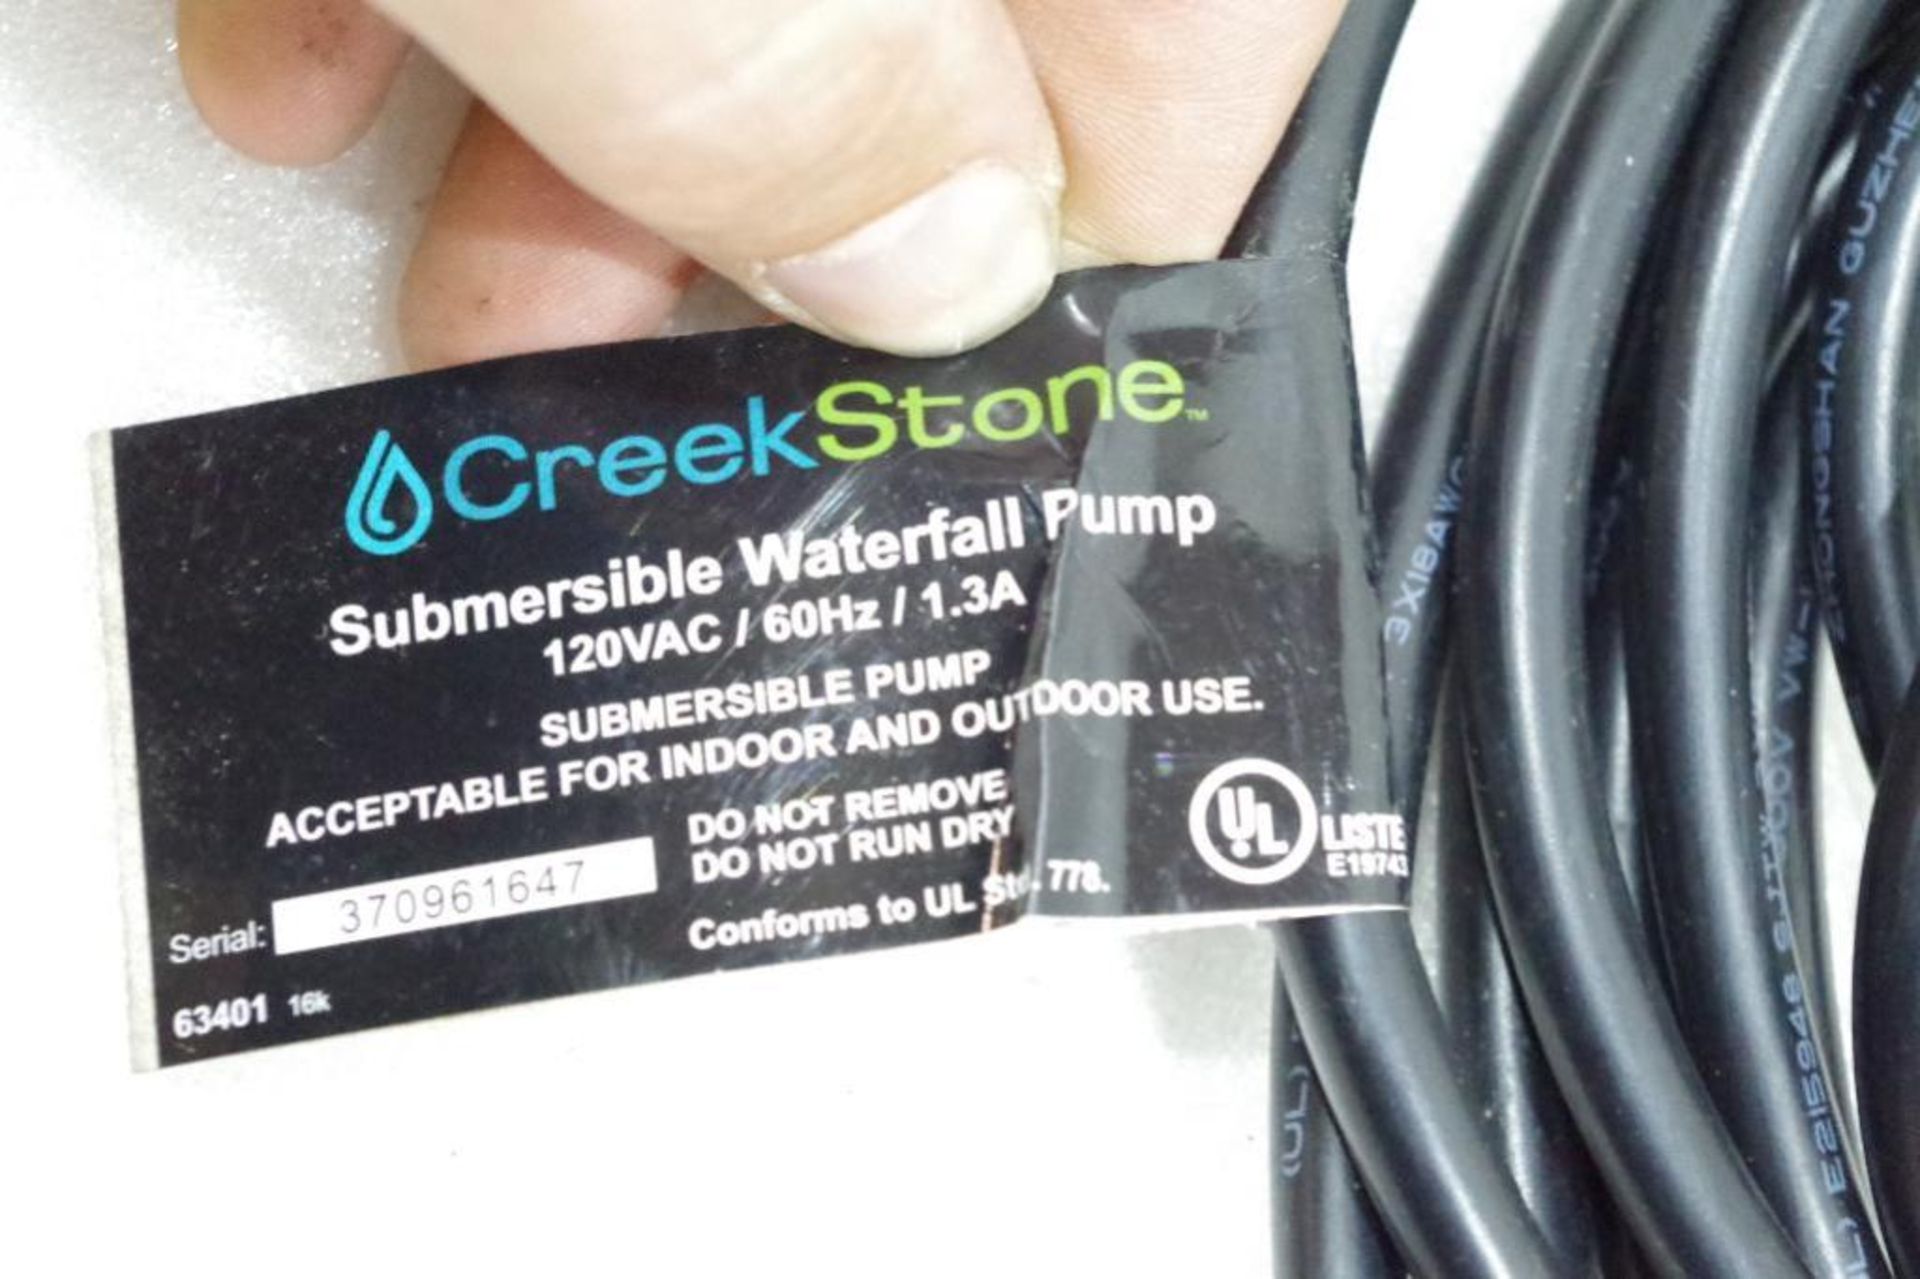 CREEK STONE 120V Submersible Waterfall Pump (Powers on, but condition unknown) - Image 2 of 3